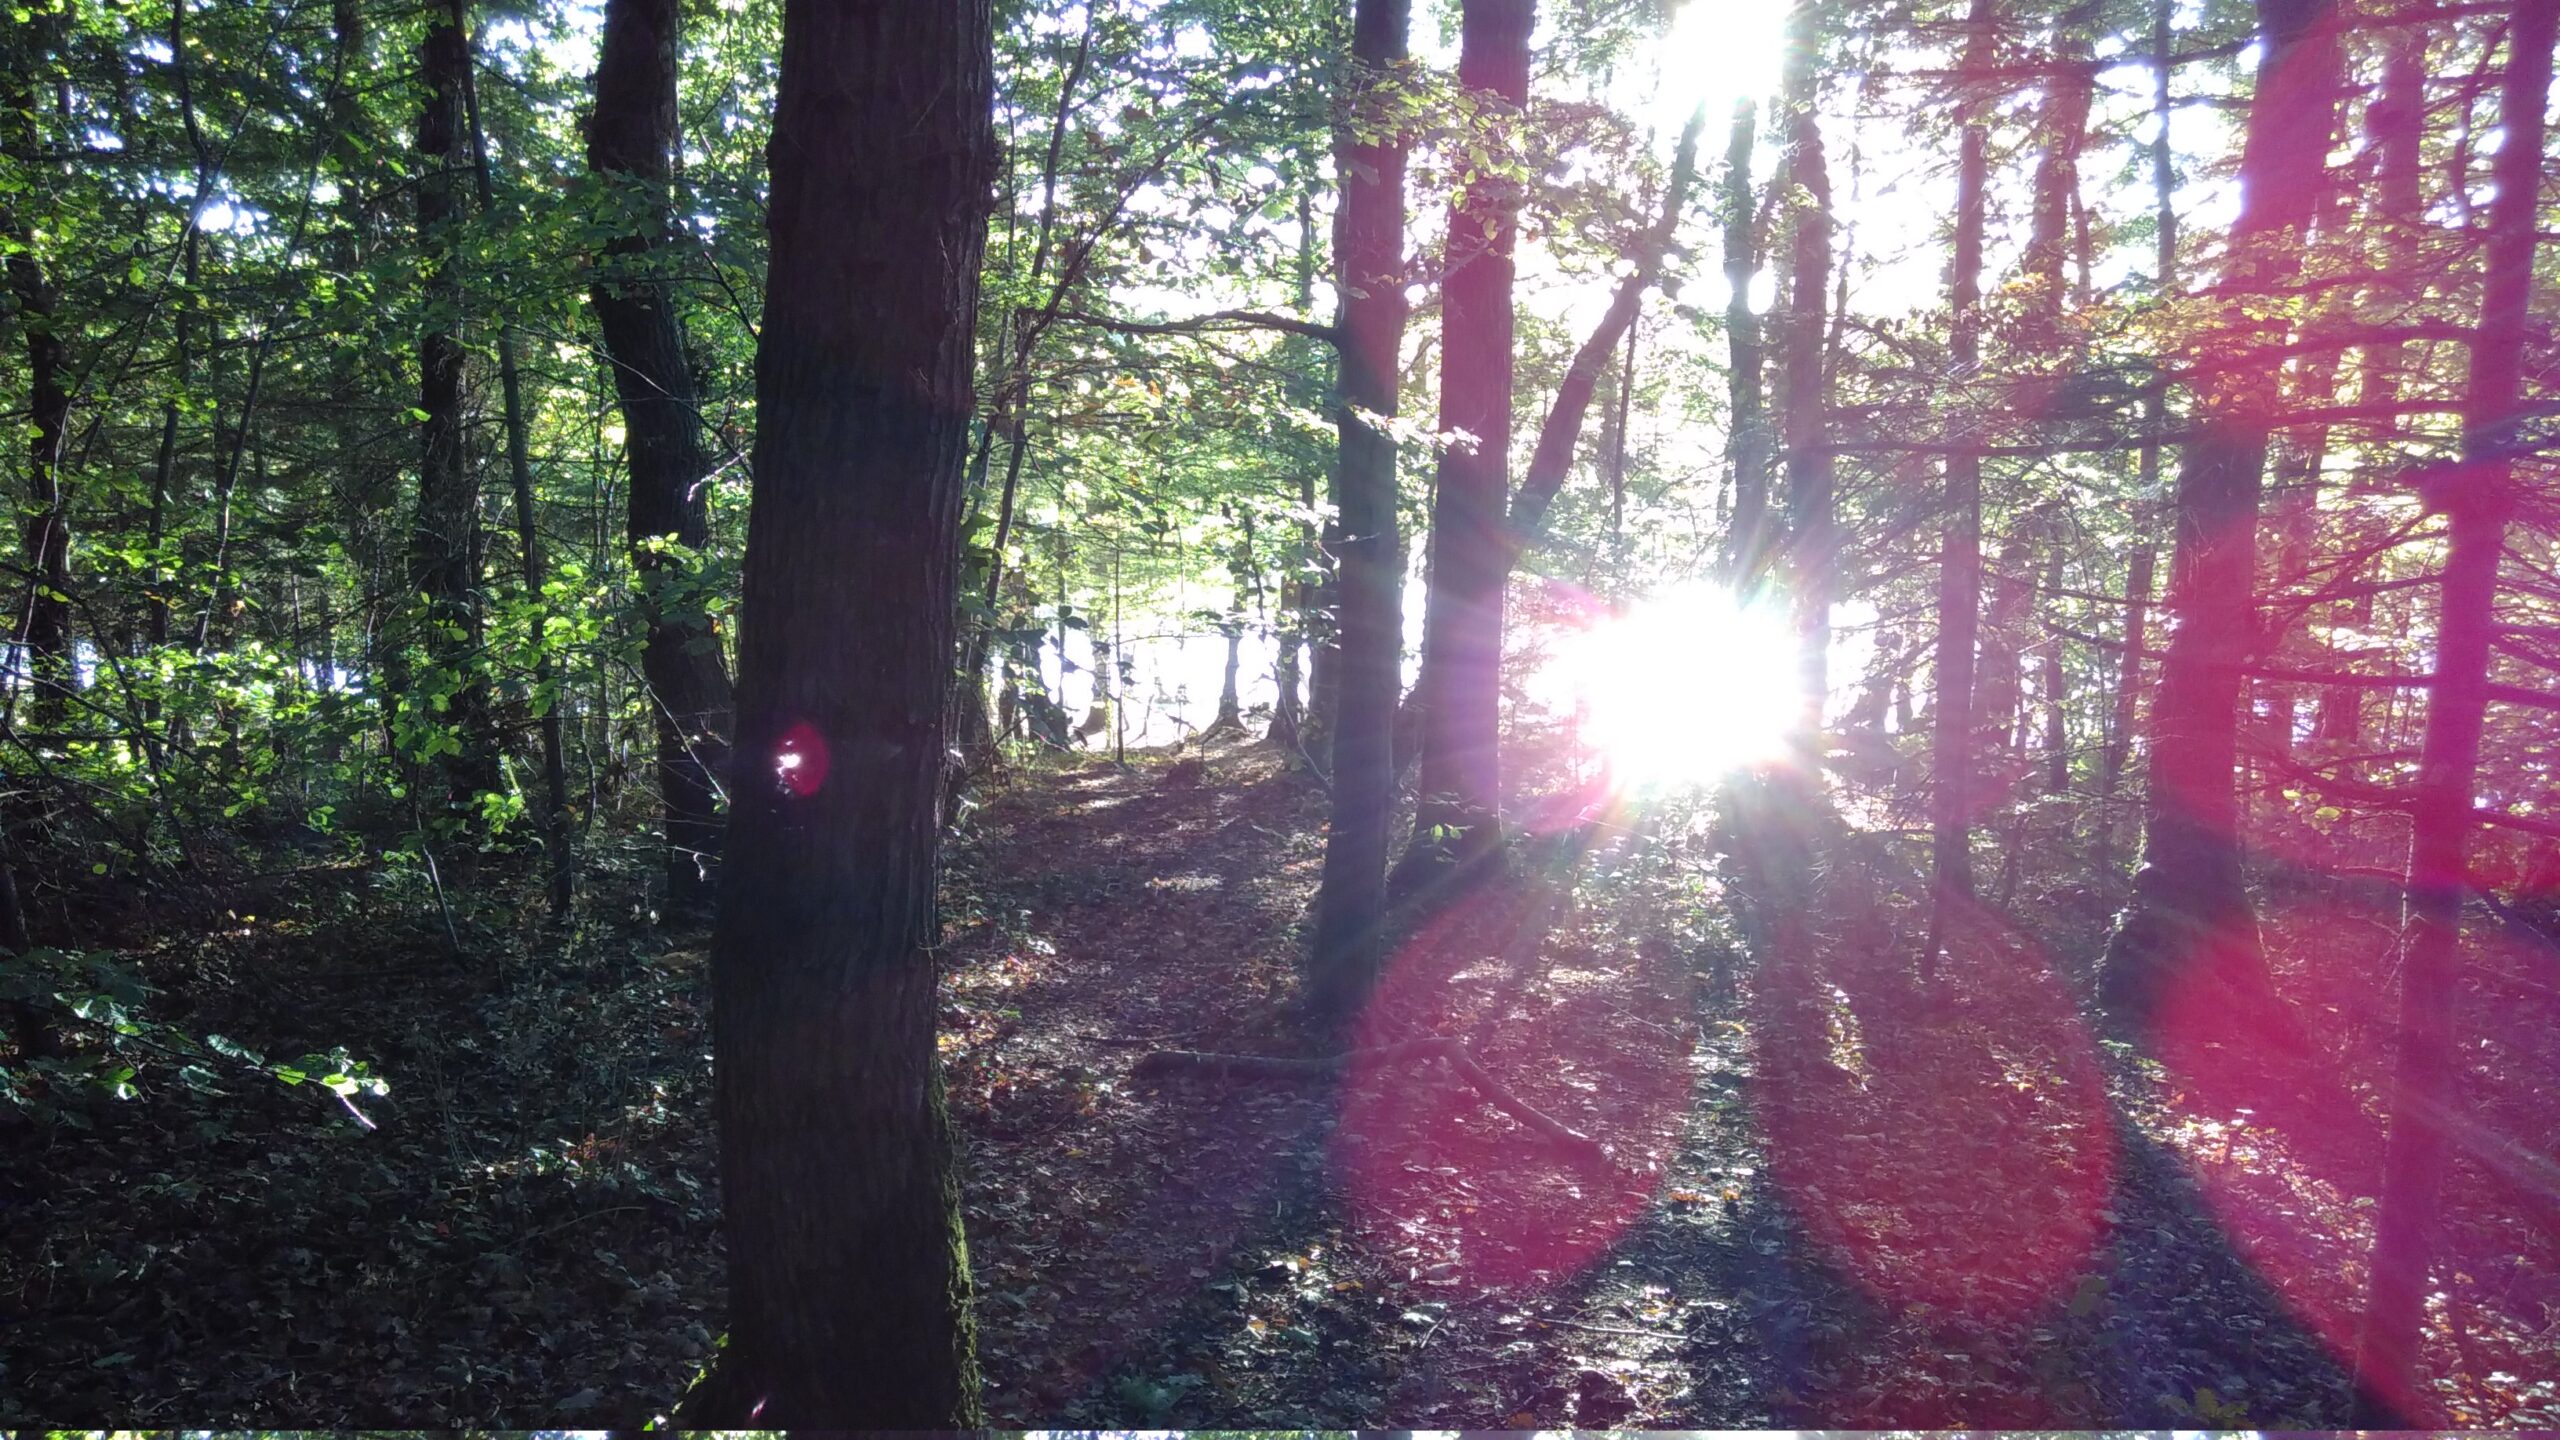 A white sun and its reflecting from a patch of water shine through a shadowed woodland.